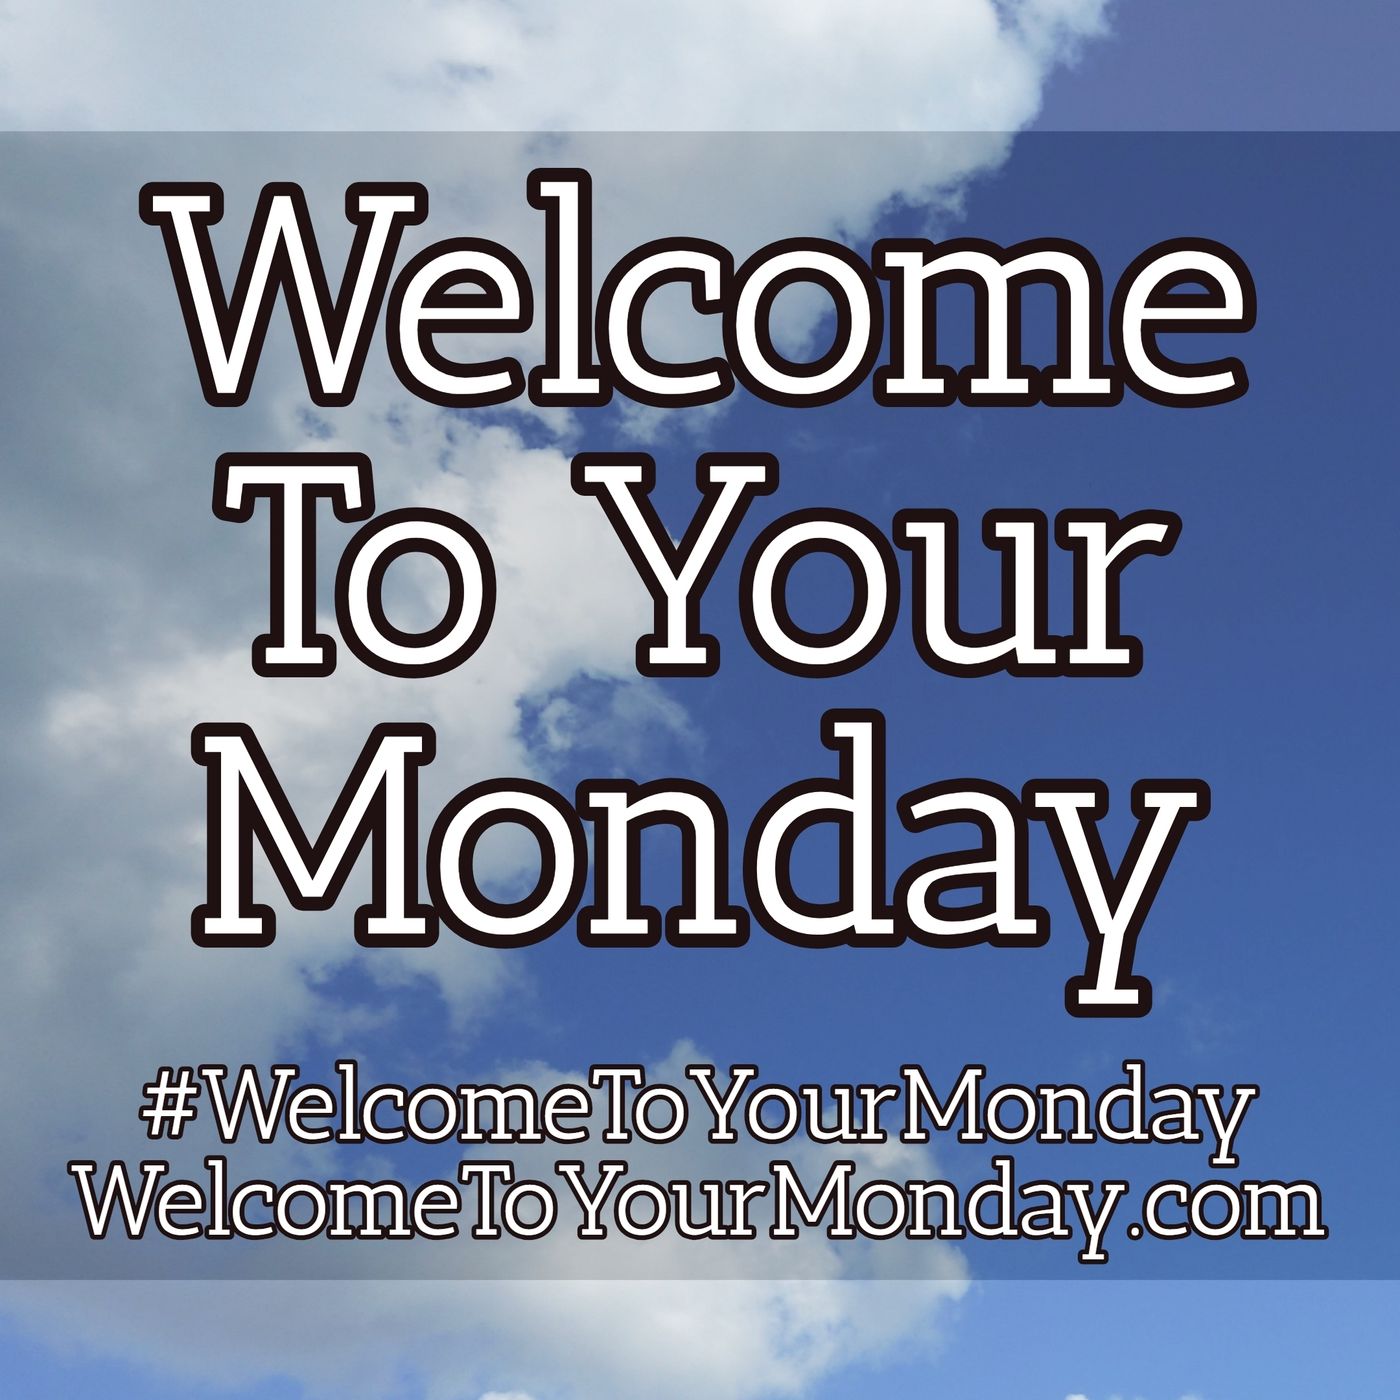 Welcome To Your Monday Message For 8/20/2018